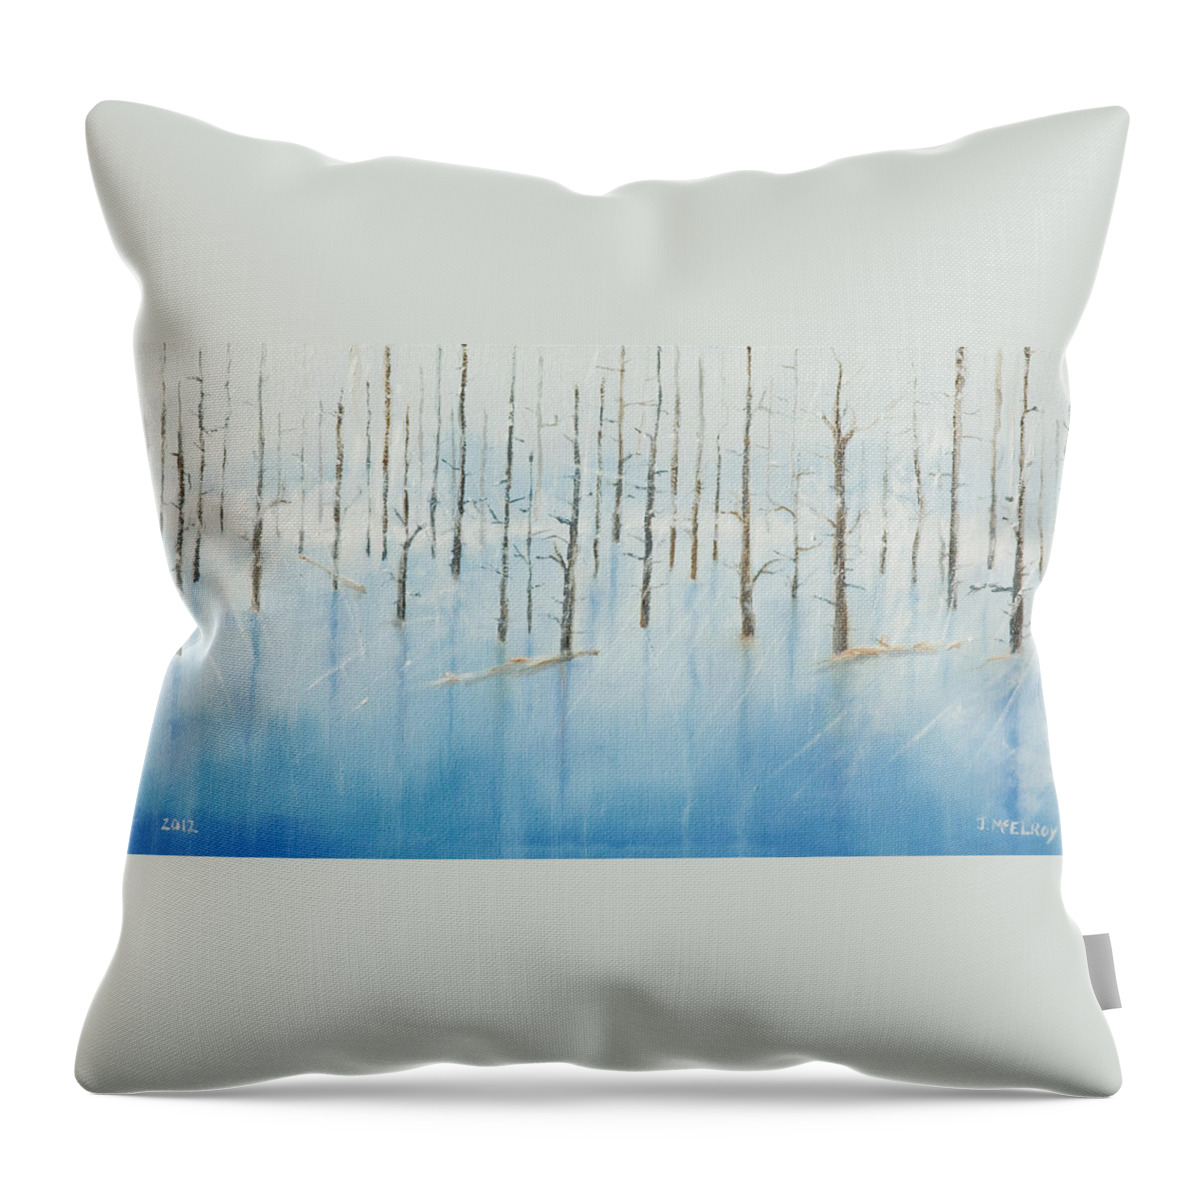 Blue Throw Pillow featuring the painting Snow in Texas by Jerry McElroy